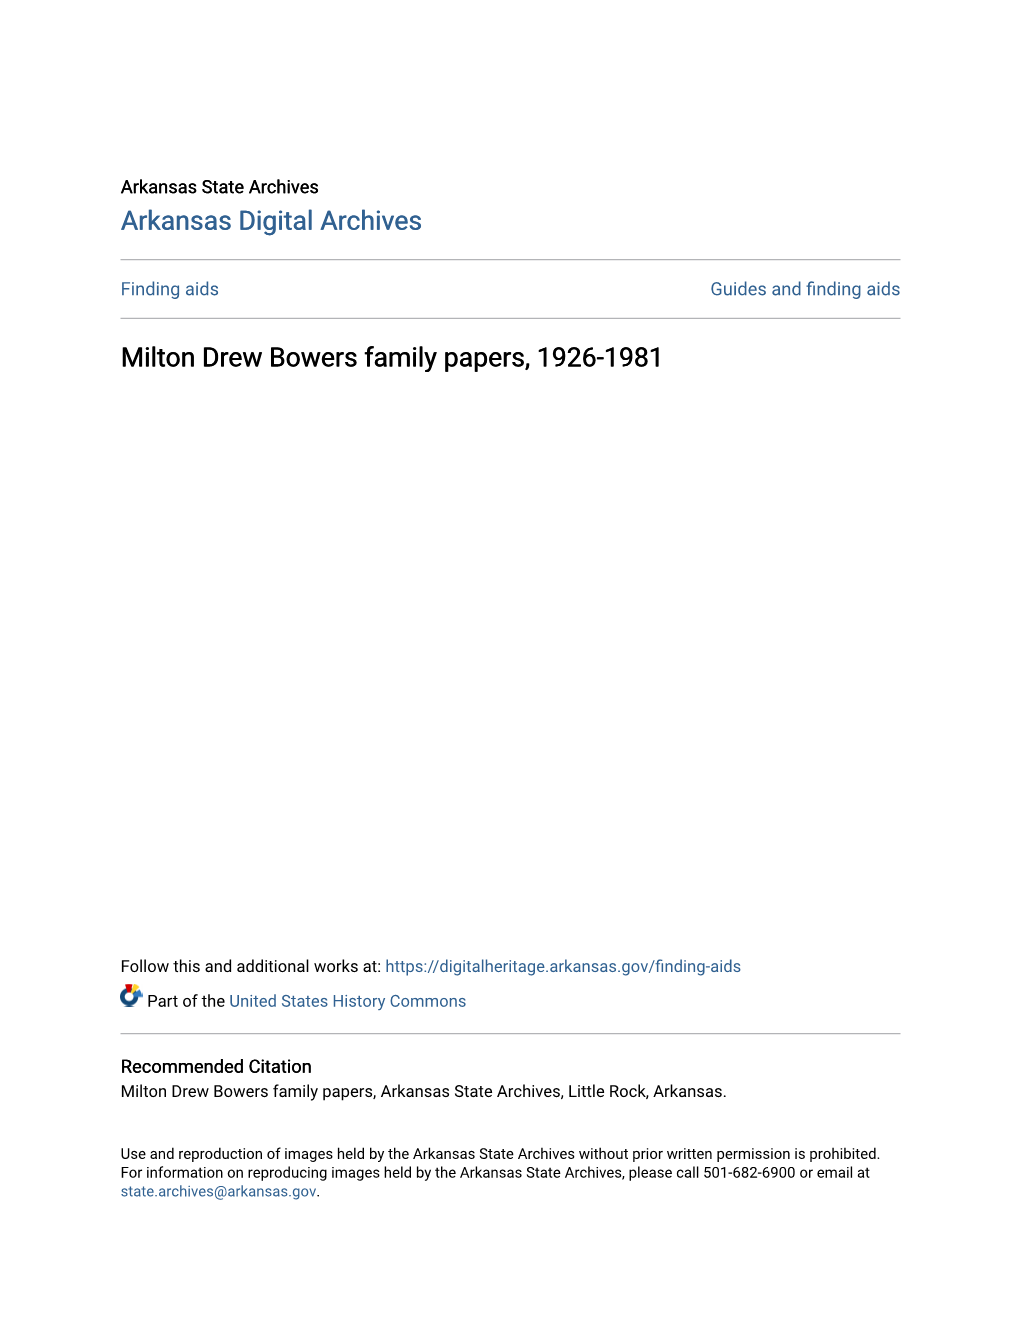 Milton Drew Bowers Family Papers, 1926-1981